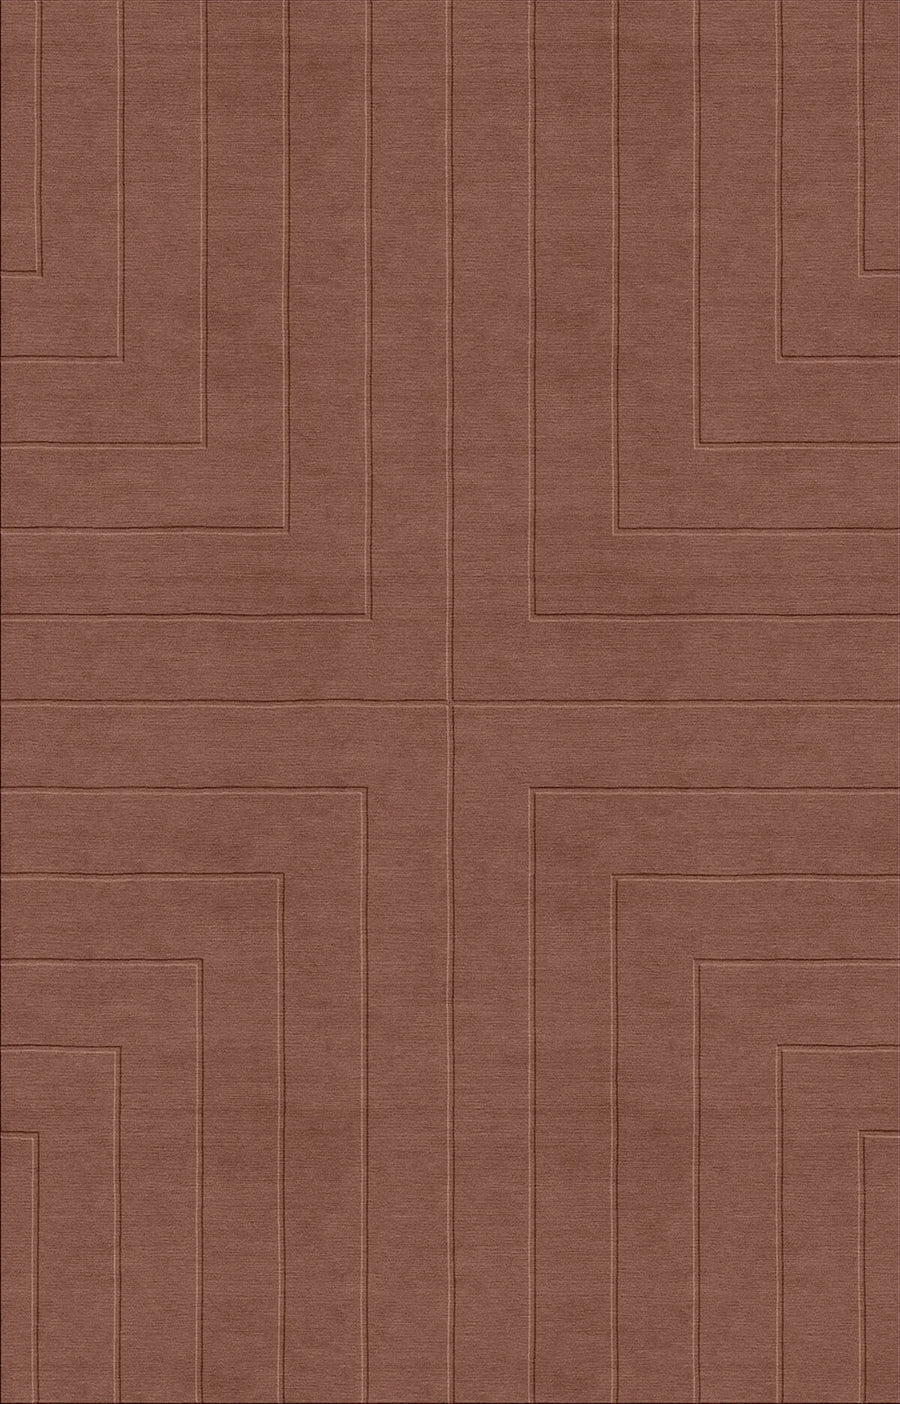 Luxury geometric relief rug by designer Jt/ Pfeiffer. Represented by Tuleste Factory in New York City.